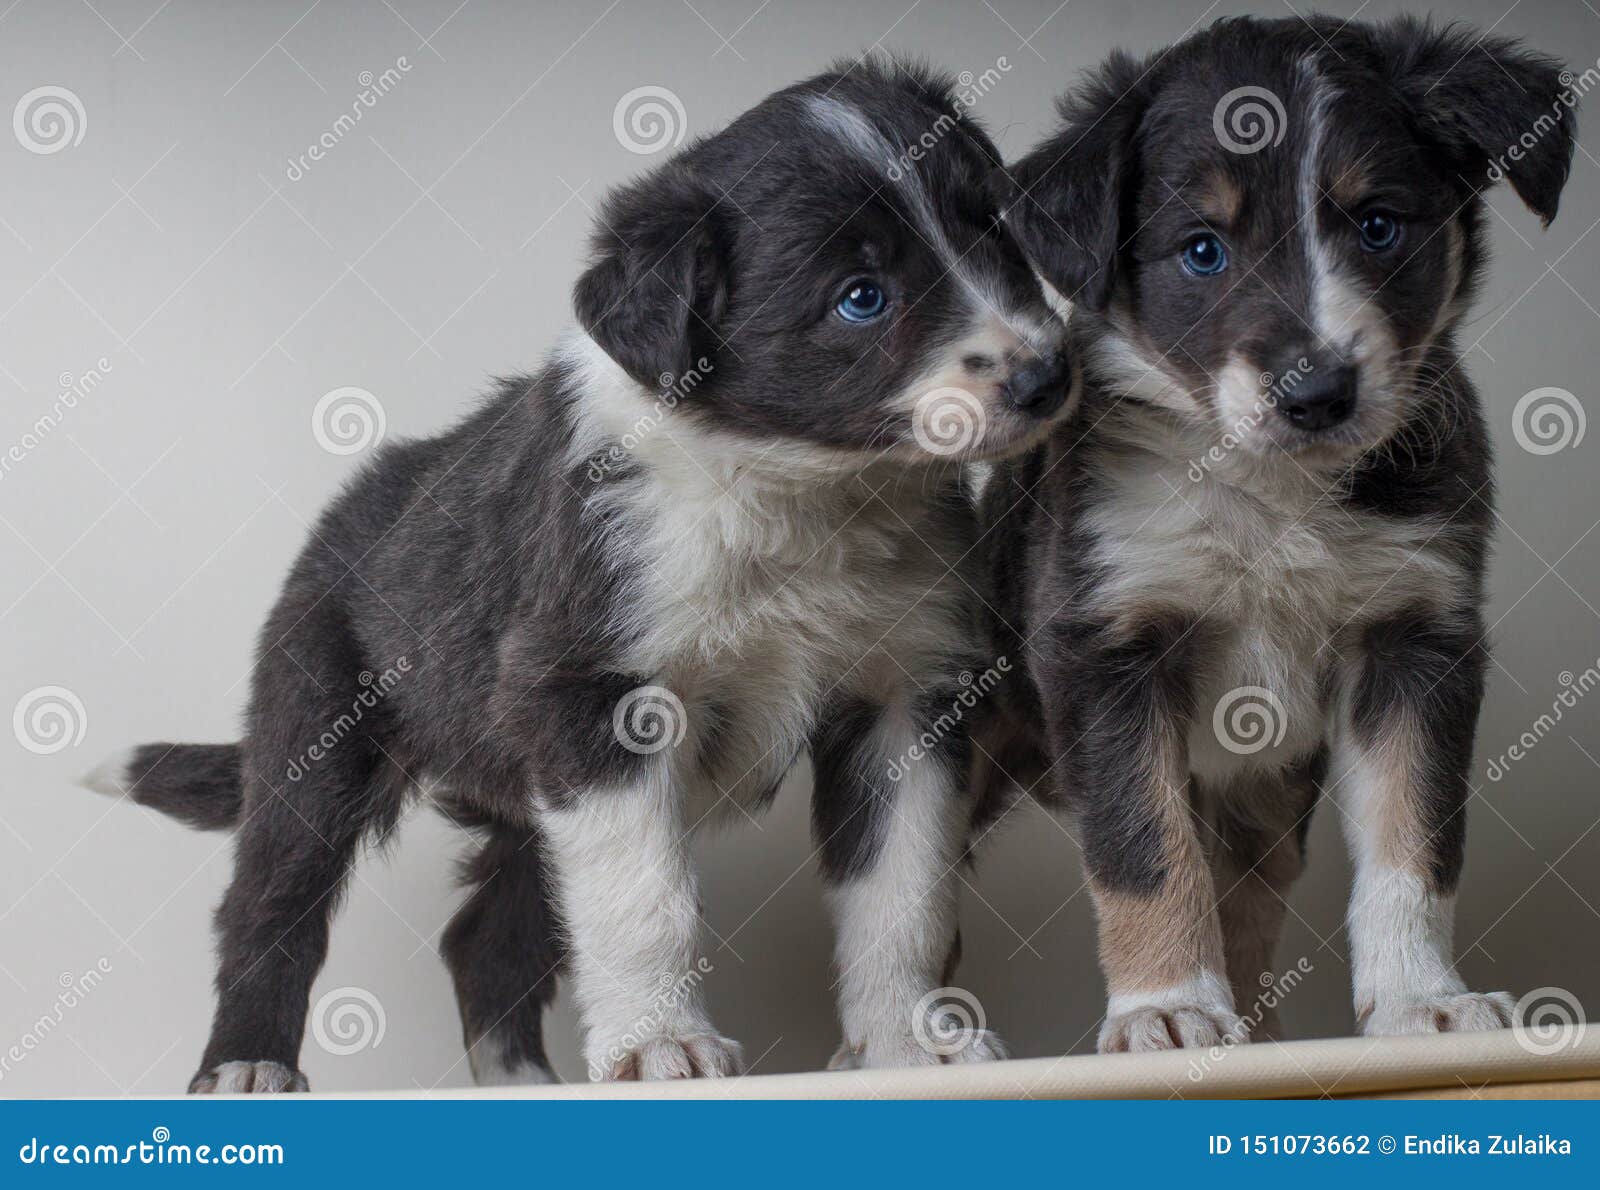 A Couple Of Border Collie Dogs With Blue Eyes Adorable Sheepdgos Brothers Together Stock Photo Image Of Small Collie 151073662